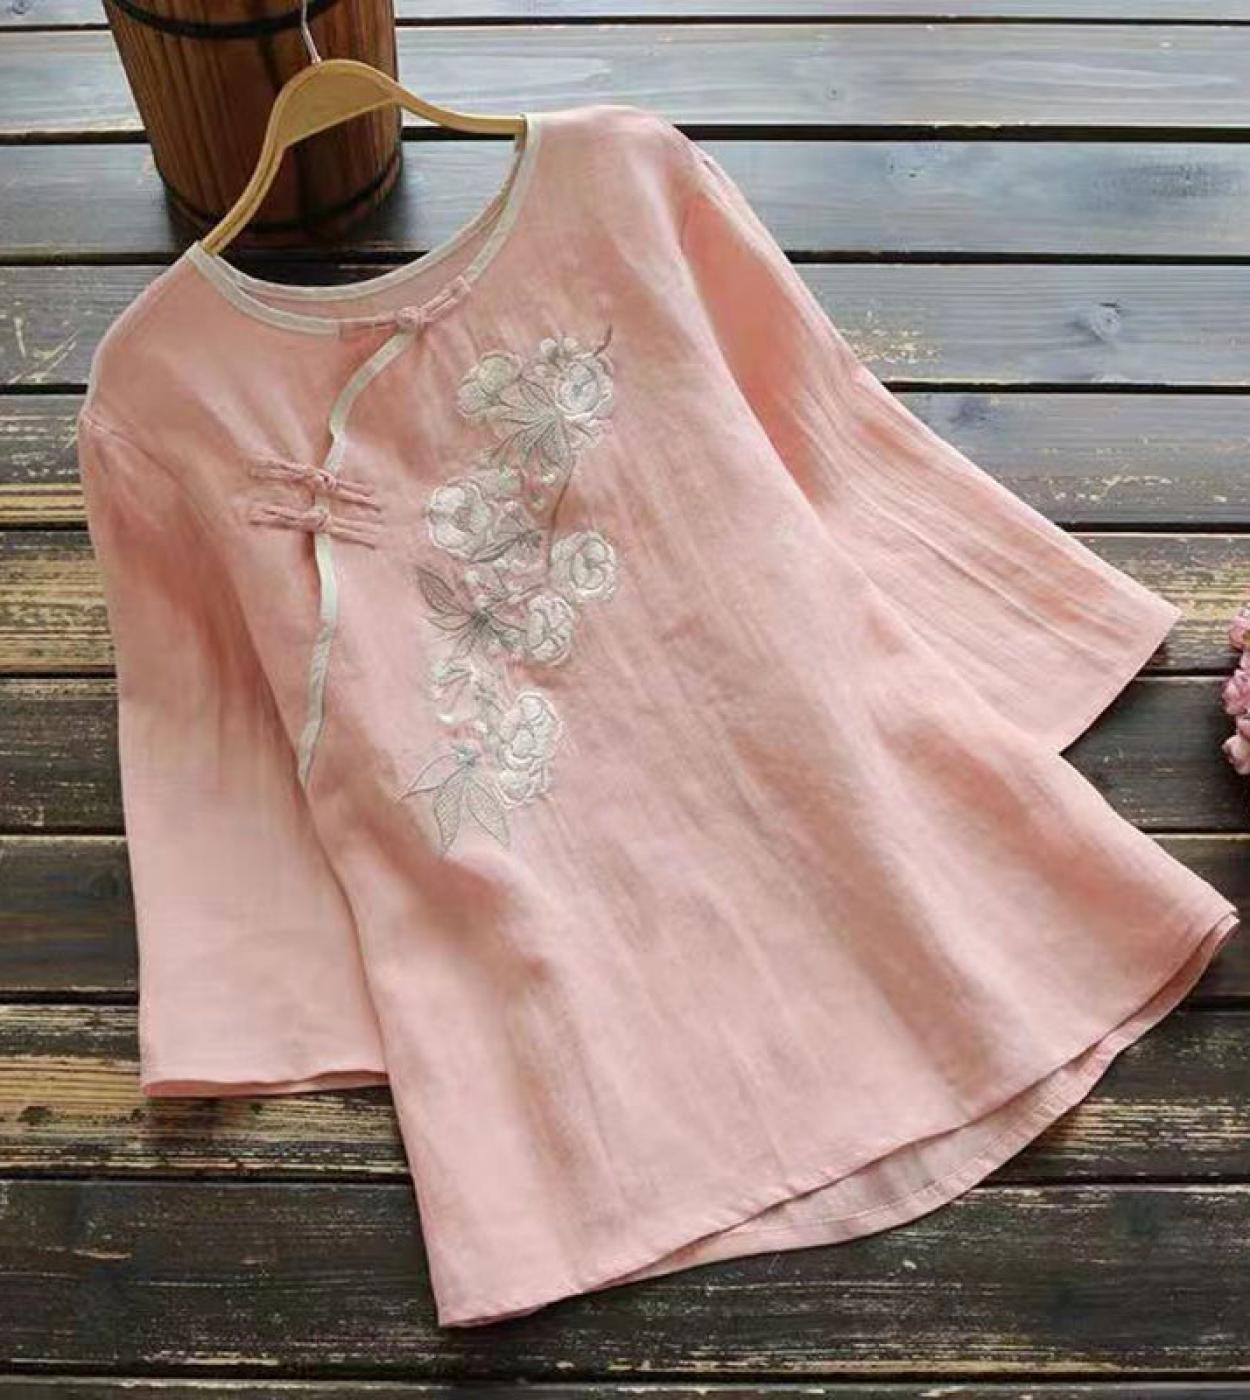 New Arrival  Summer Women Tshirt Folk Style Vintage Floral Embroidery Tee Shirt Femme Oneck Button Cotton Tops D334  Tsh